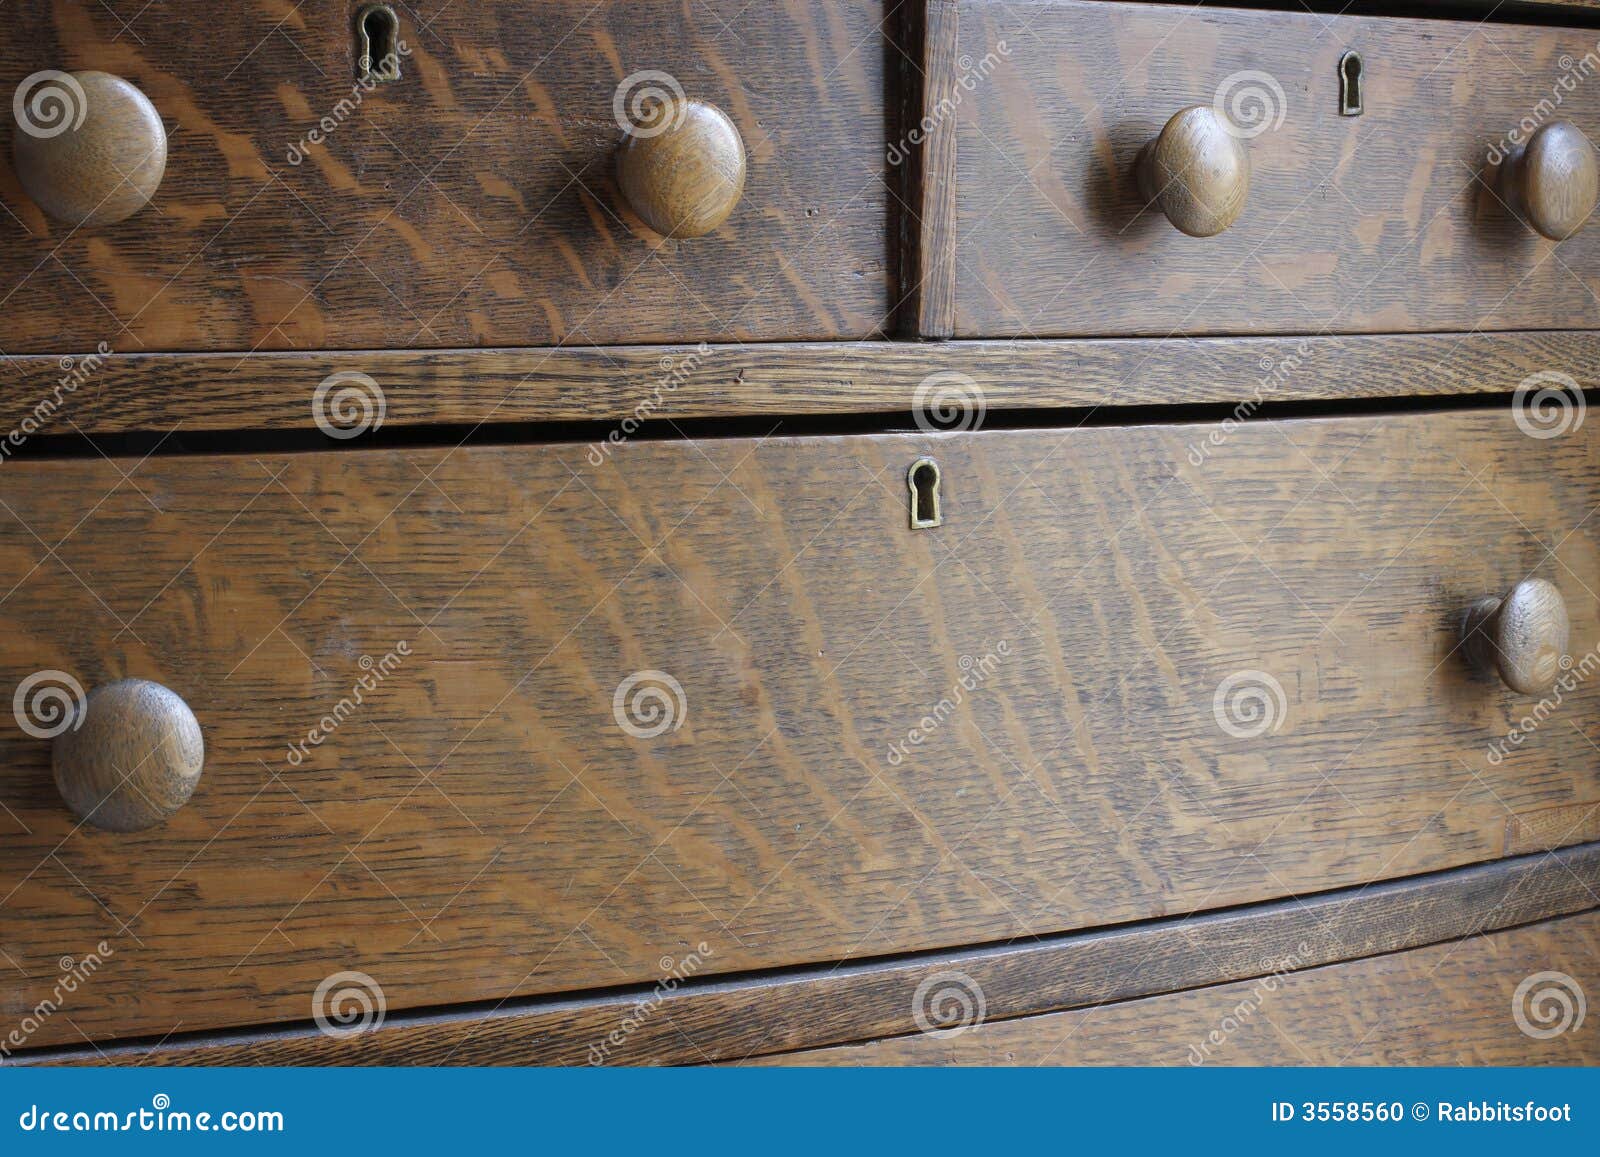 Wooden Antique Drawer Chest Stock Photo Image Of Vintage Rustic